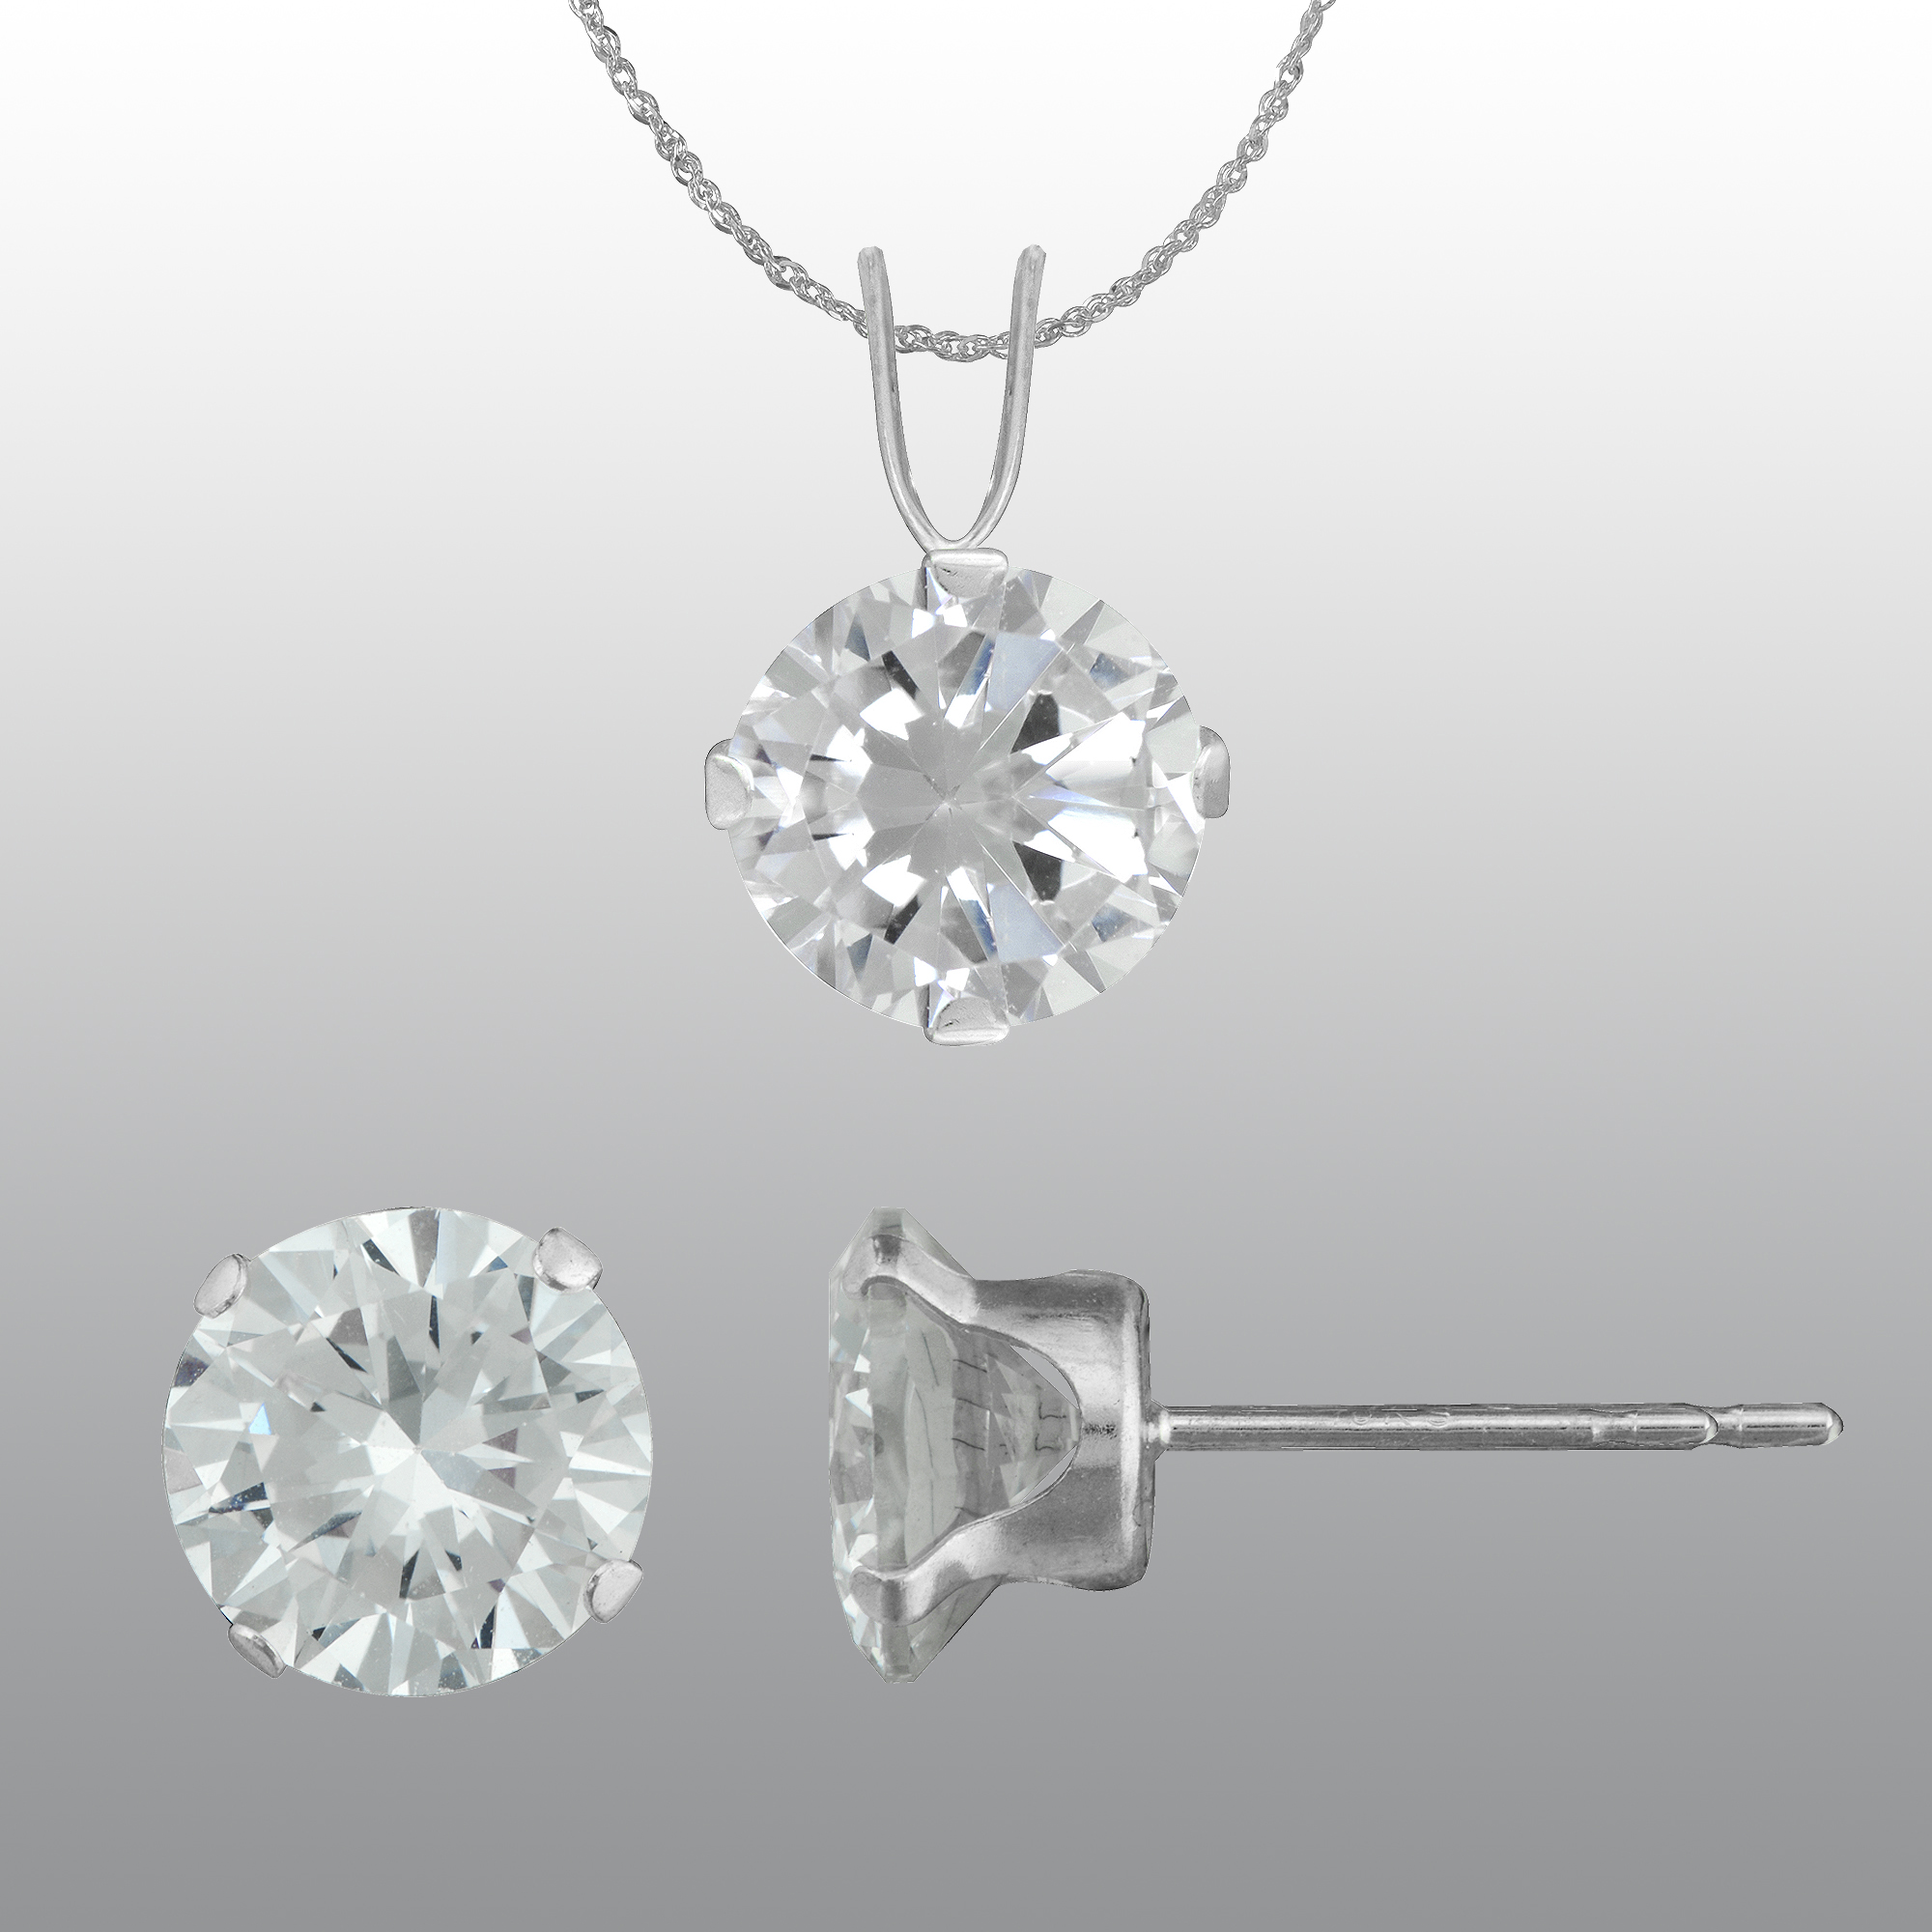 10KT White Gold 4mm Cubic Zirconia Pendant and Earring Set